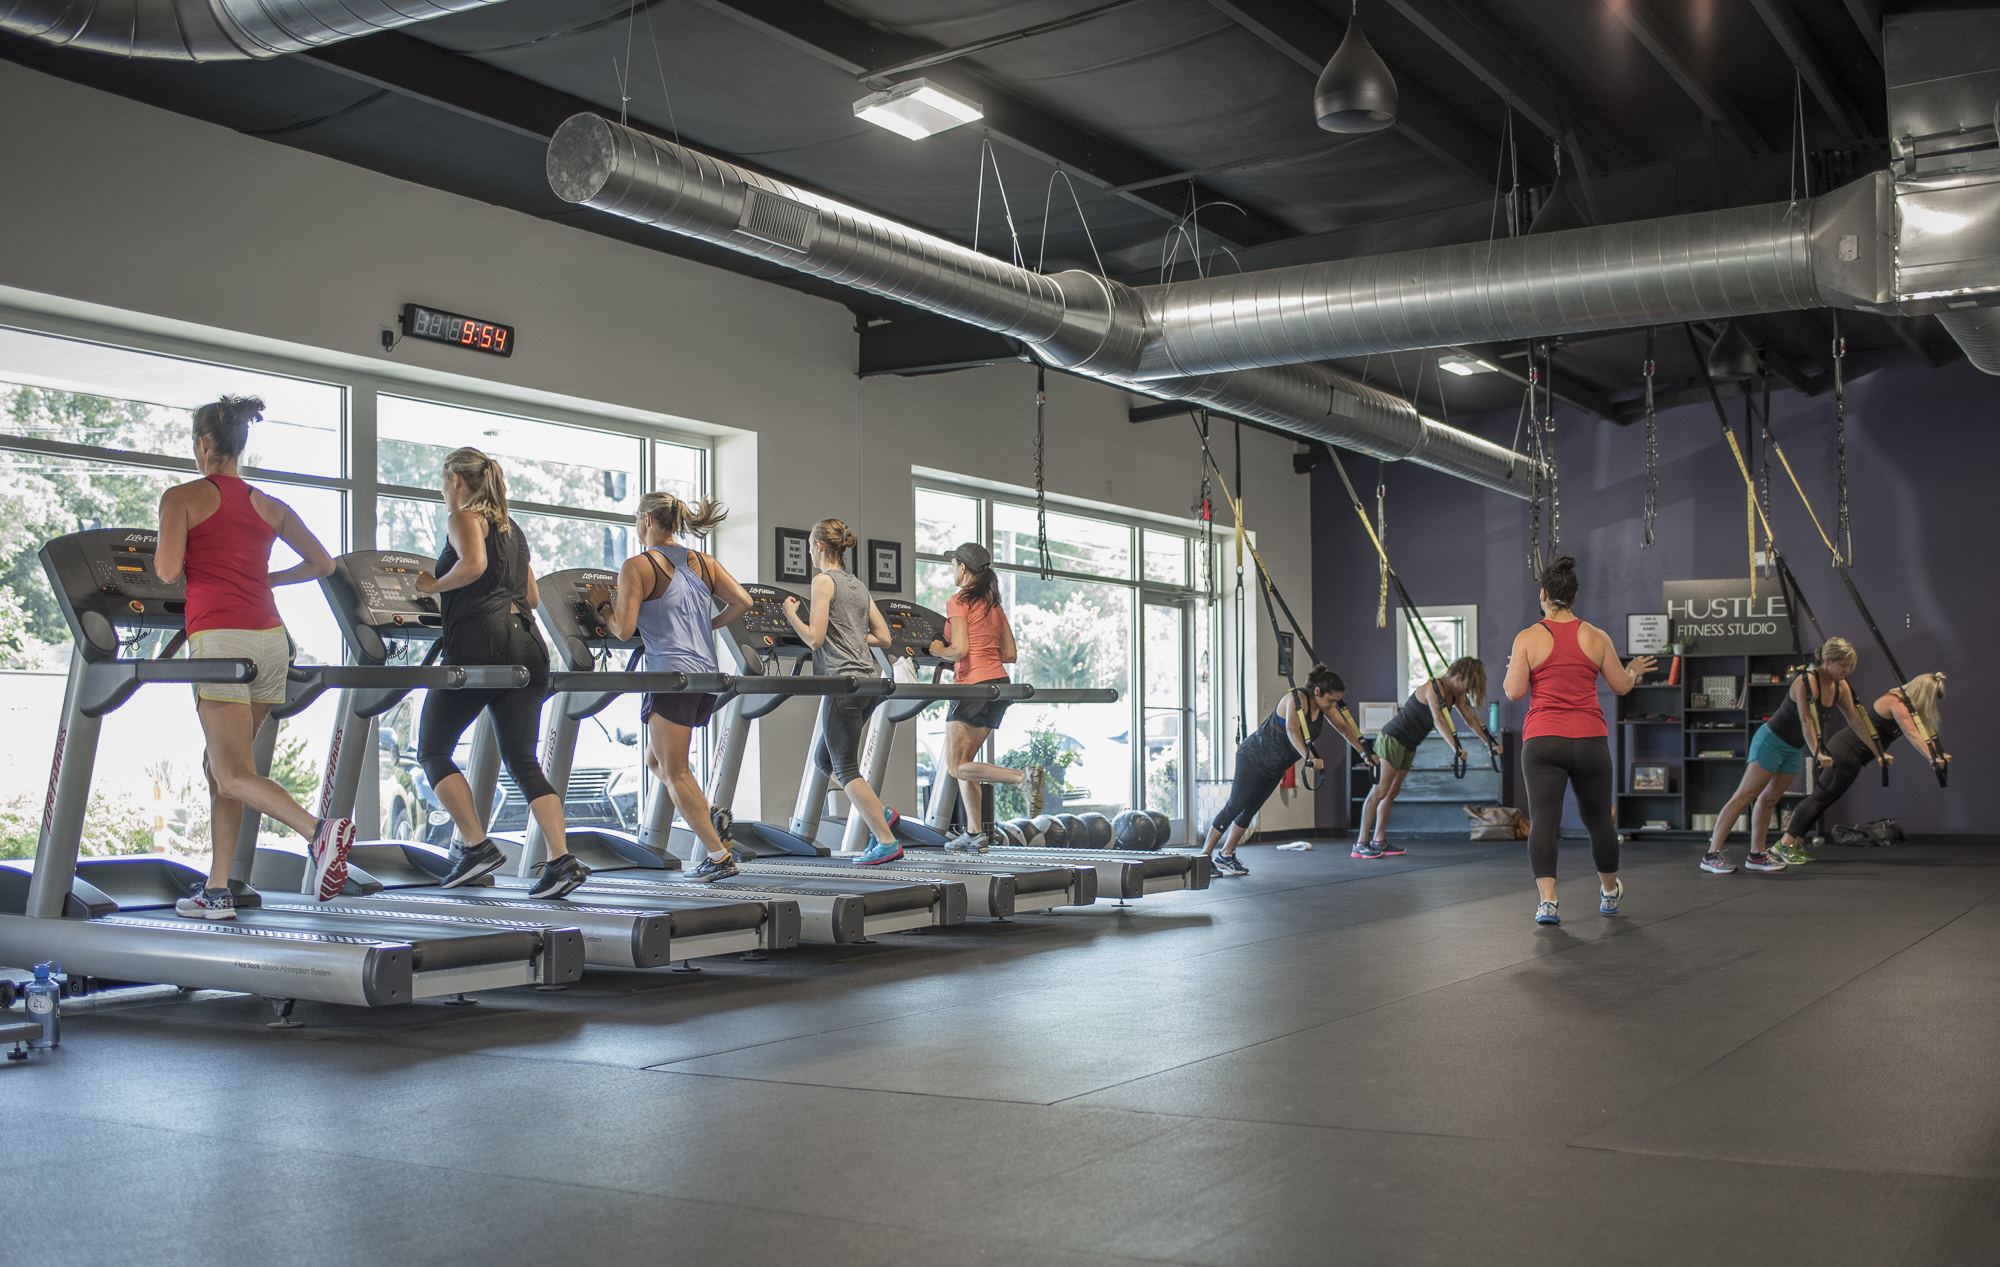 Hustle Fitness Studio: Finding Strength in Community — Cary, NC